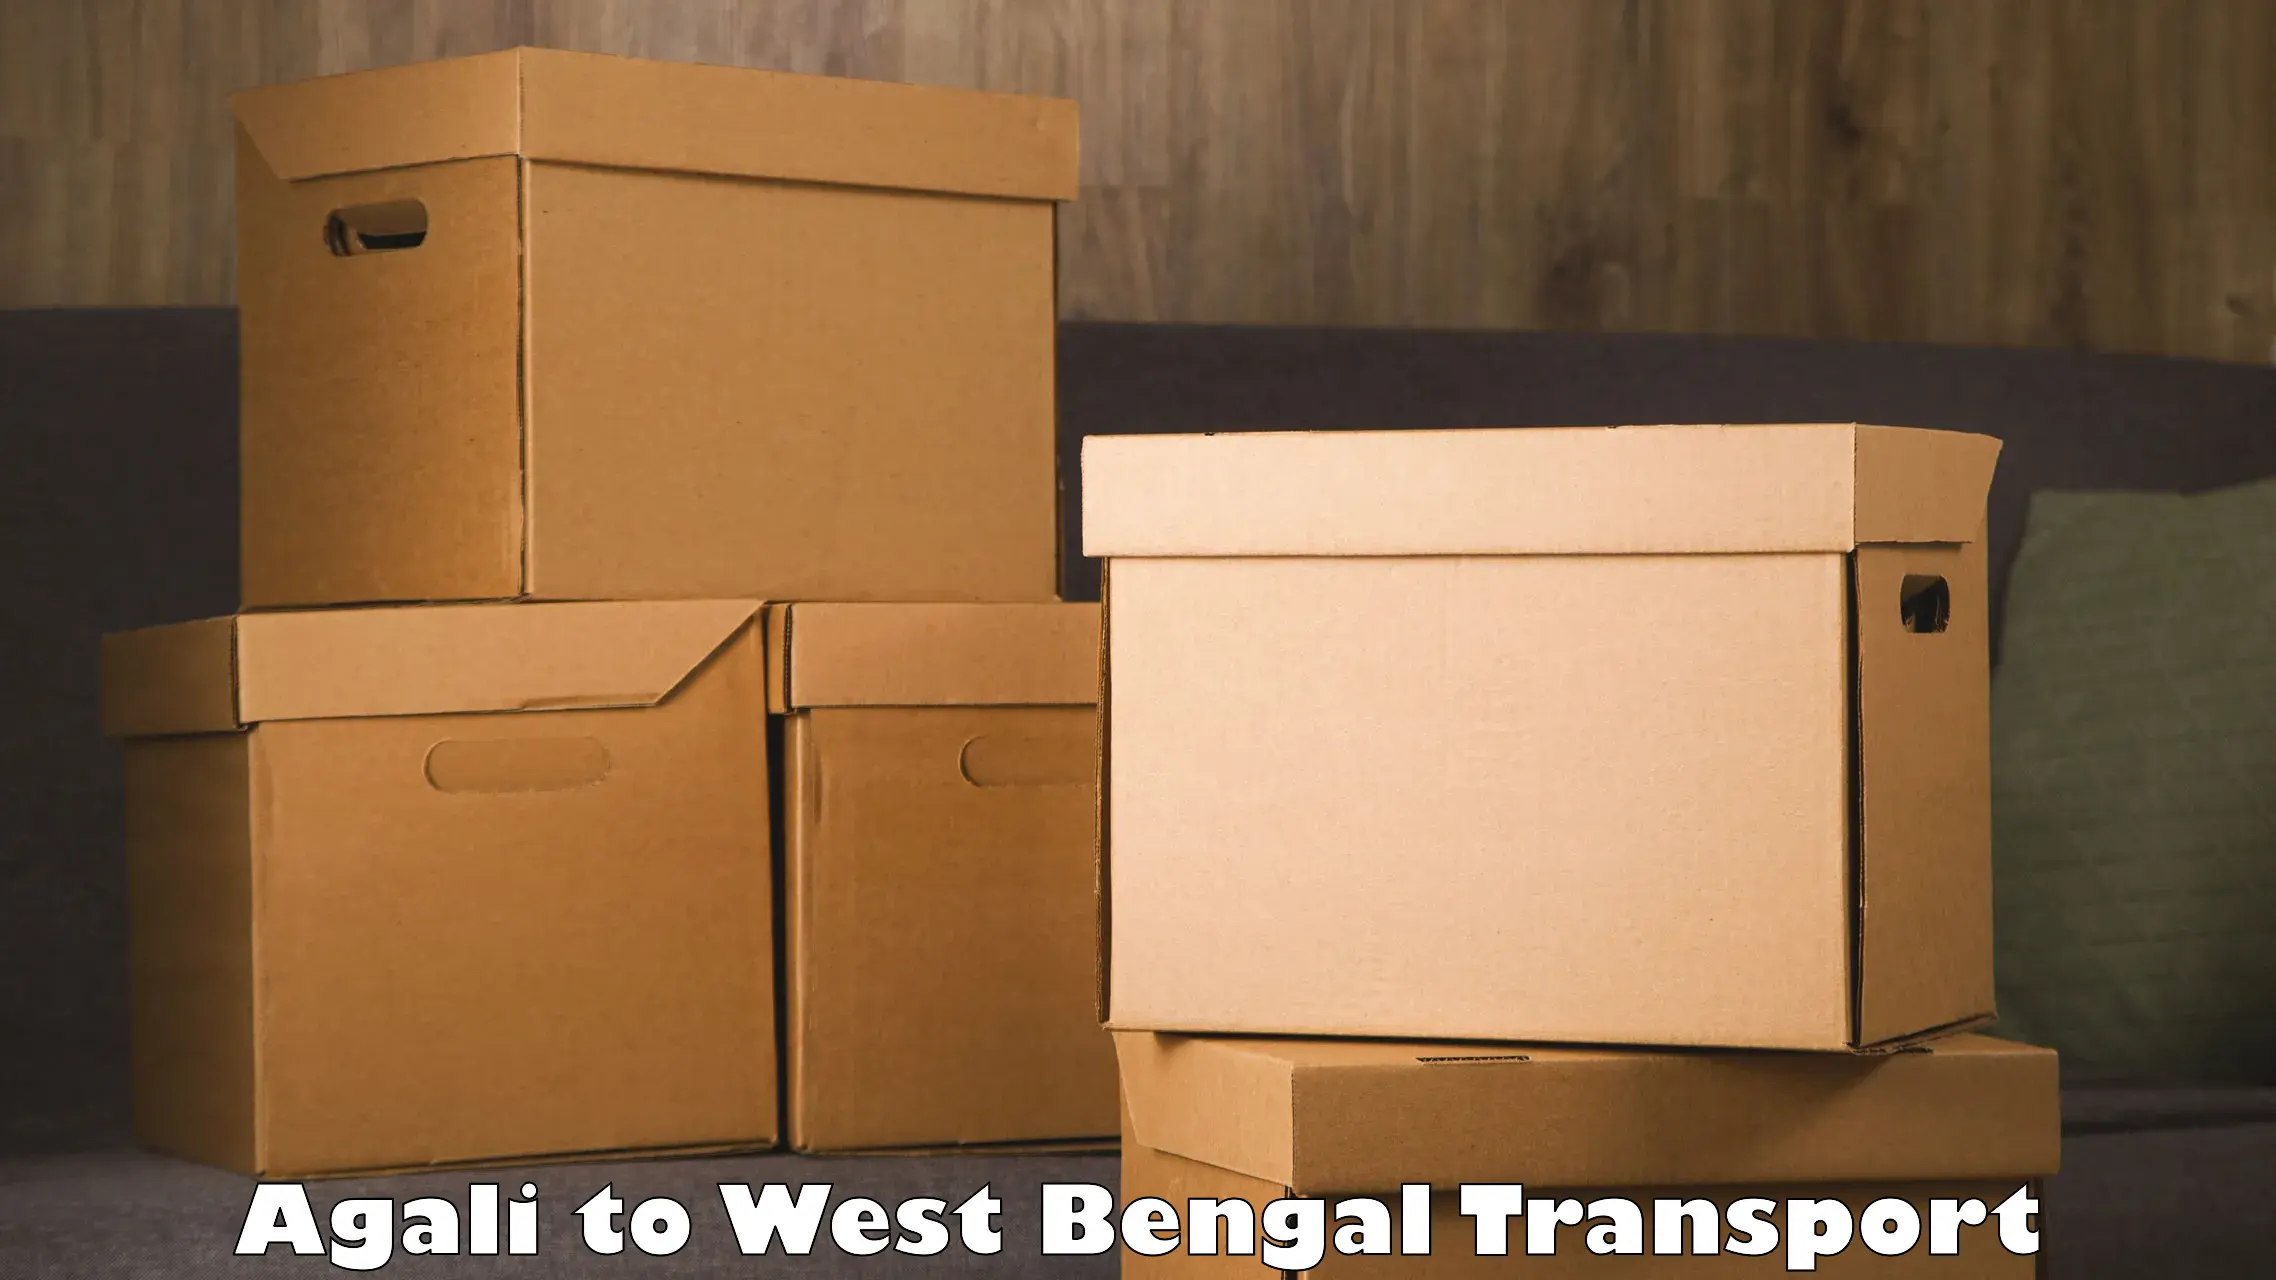 Commercial transport service Agali to West Bengal